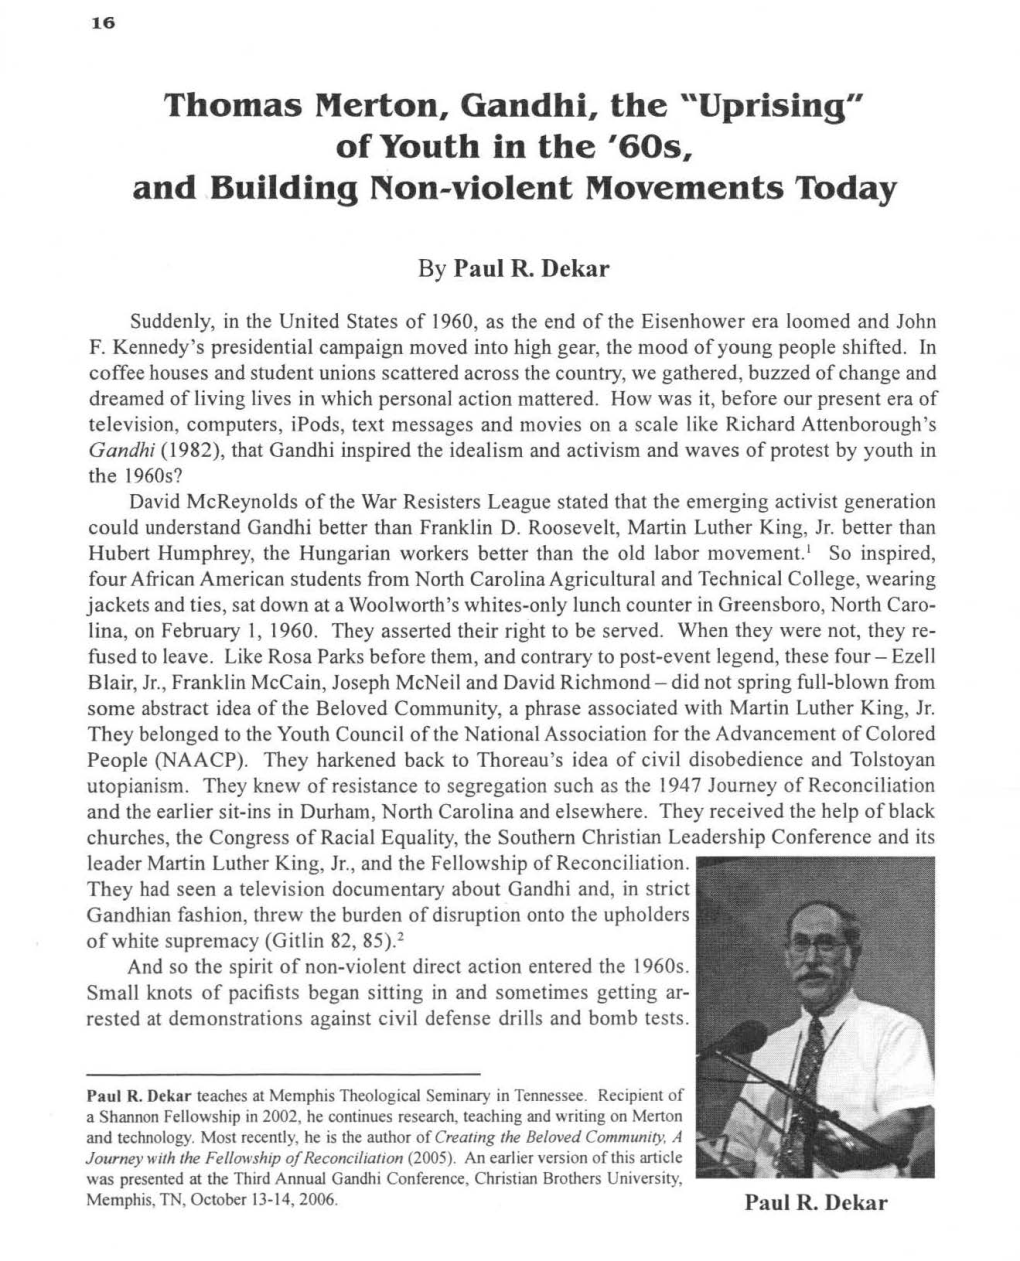 Thomas Merton, Gandhi, the "Uprising" of Youth in the '60S, and Building Non-Violent Movements Today